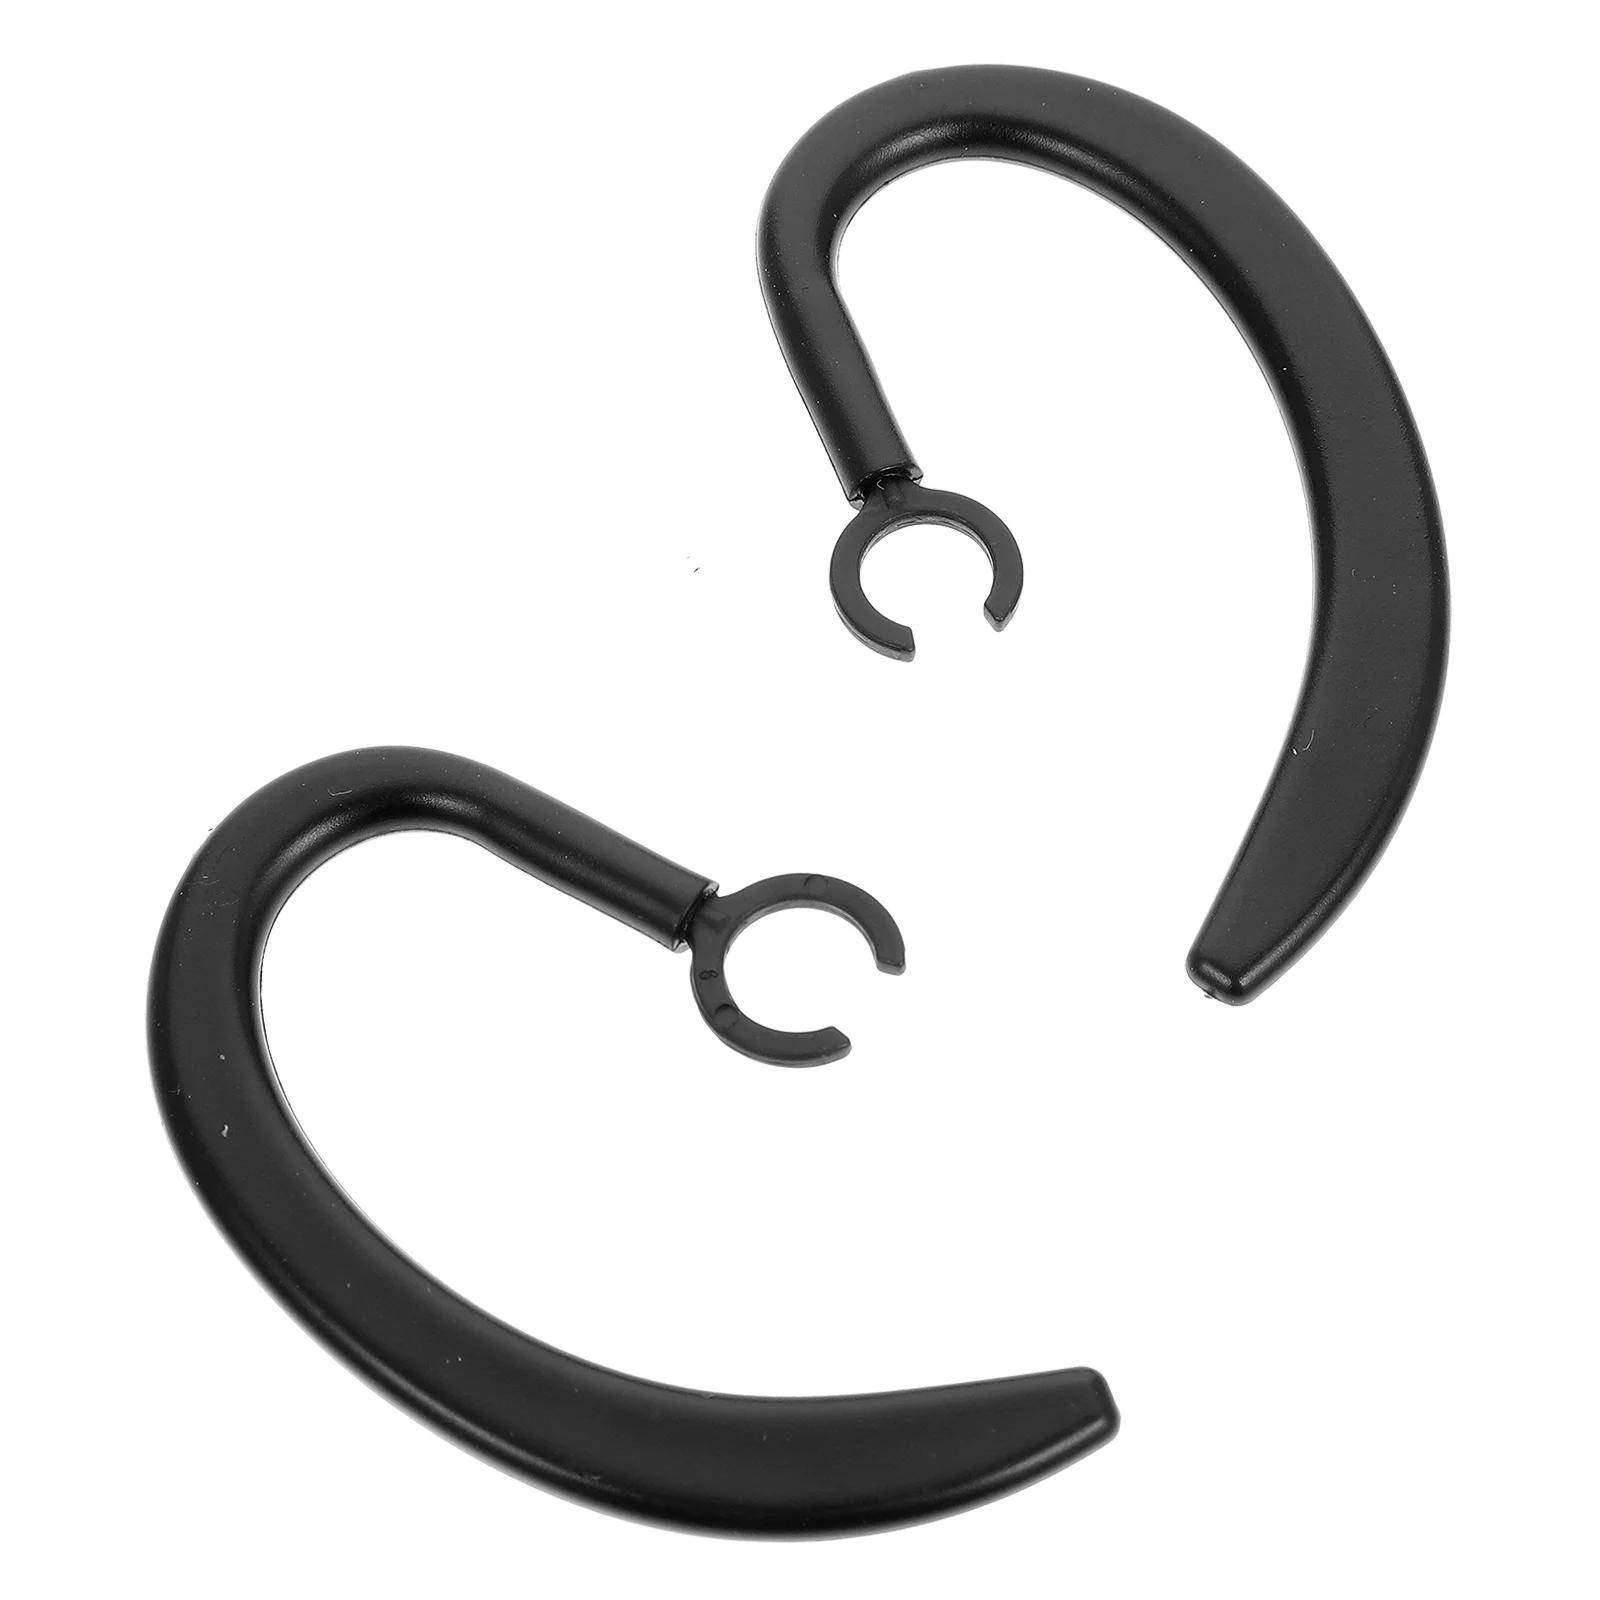 

2 Pcs Headset Earhook Clamp Headphones Anti-lost Hooks Earpiece Silicone Plugs Swivel Replacement Rubber Non-